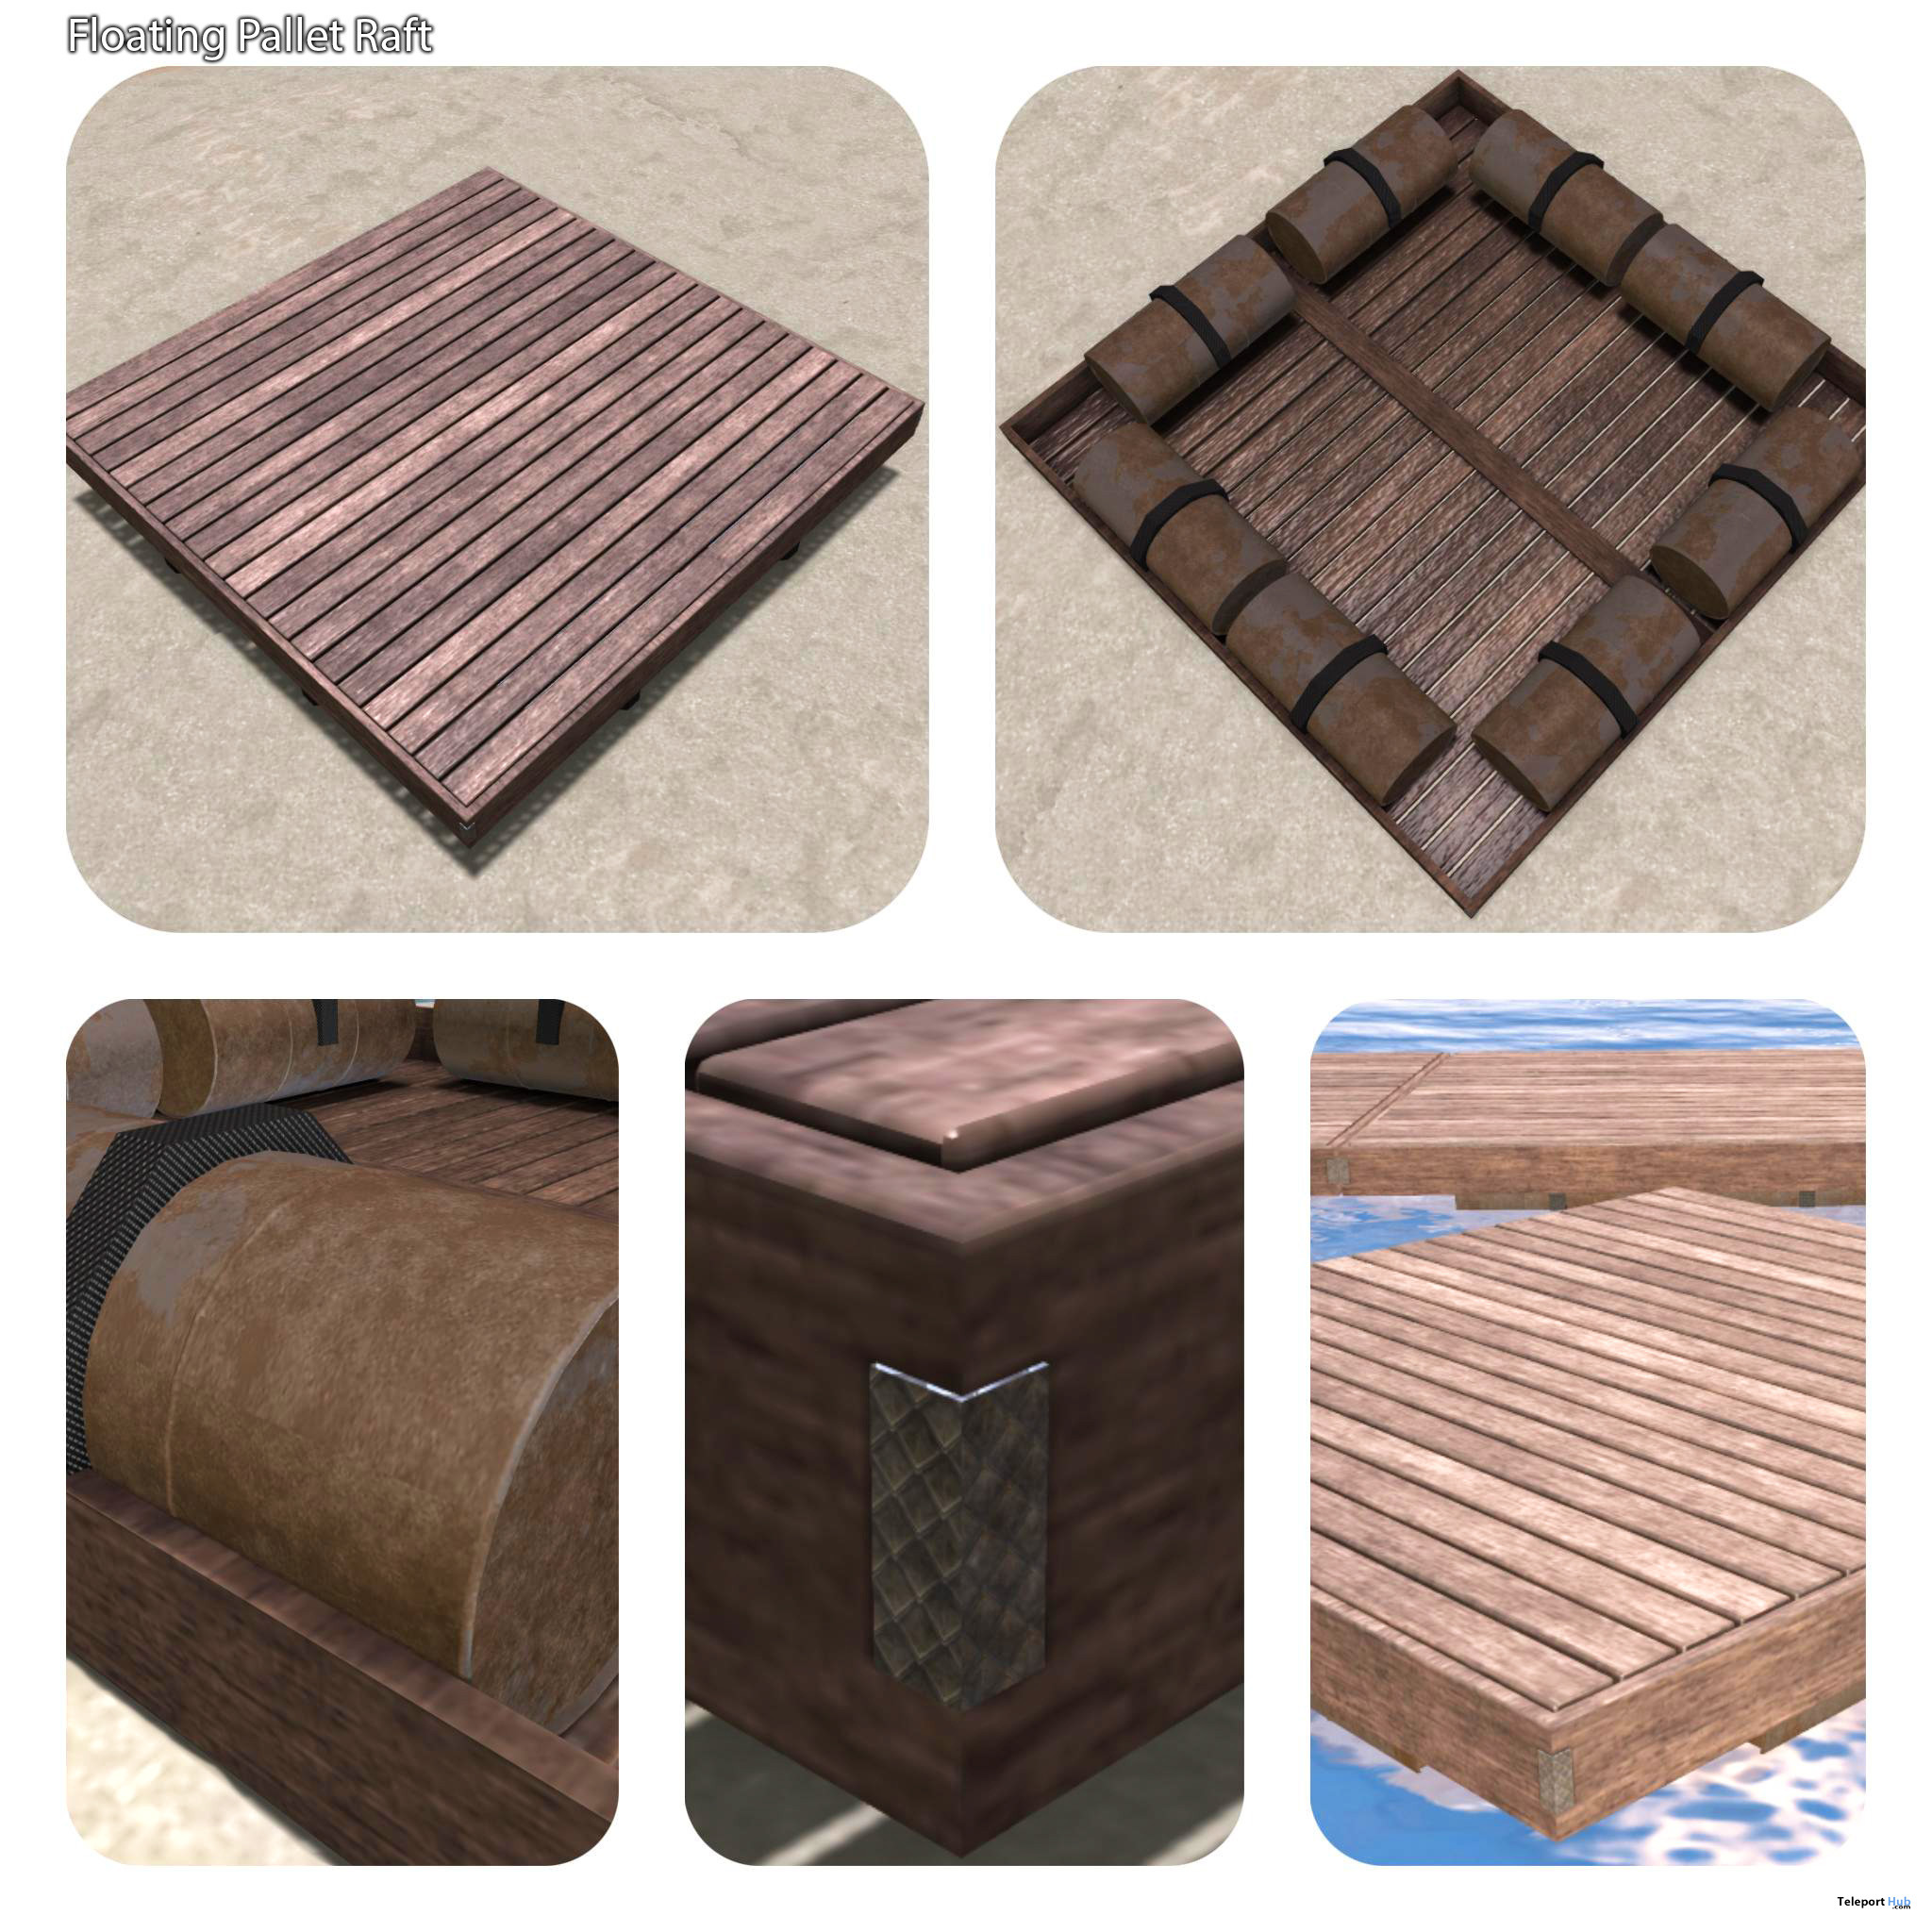 New Release: Floating Pallet Raft by [satus Inc] - Teleport Hub - teleporthub.com